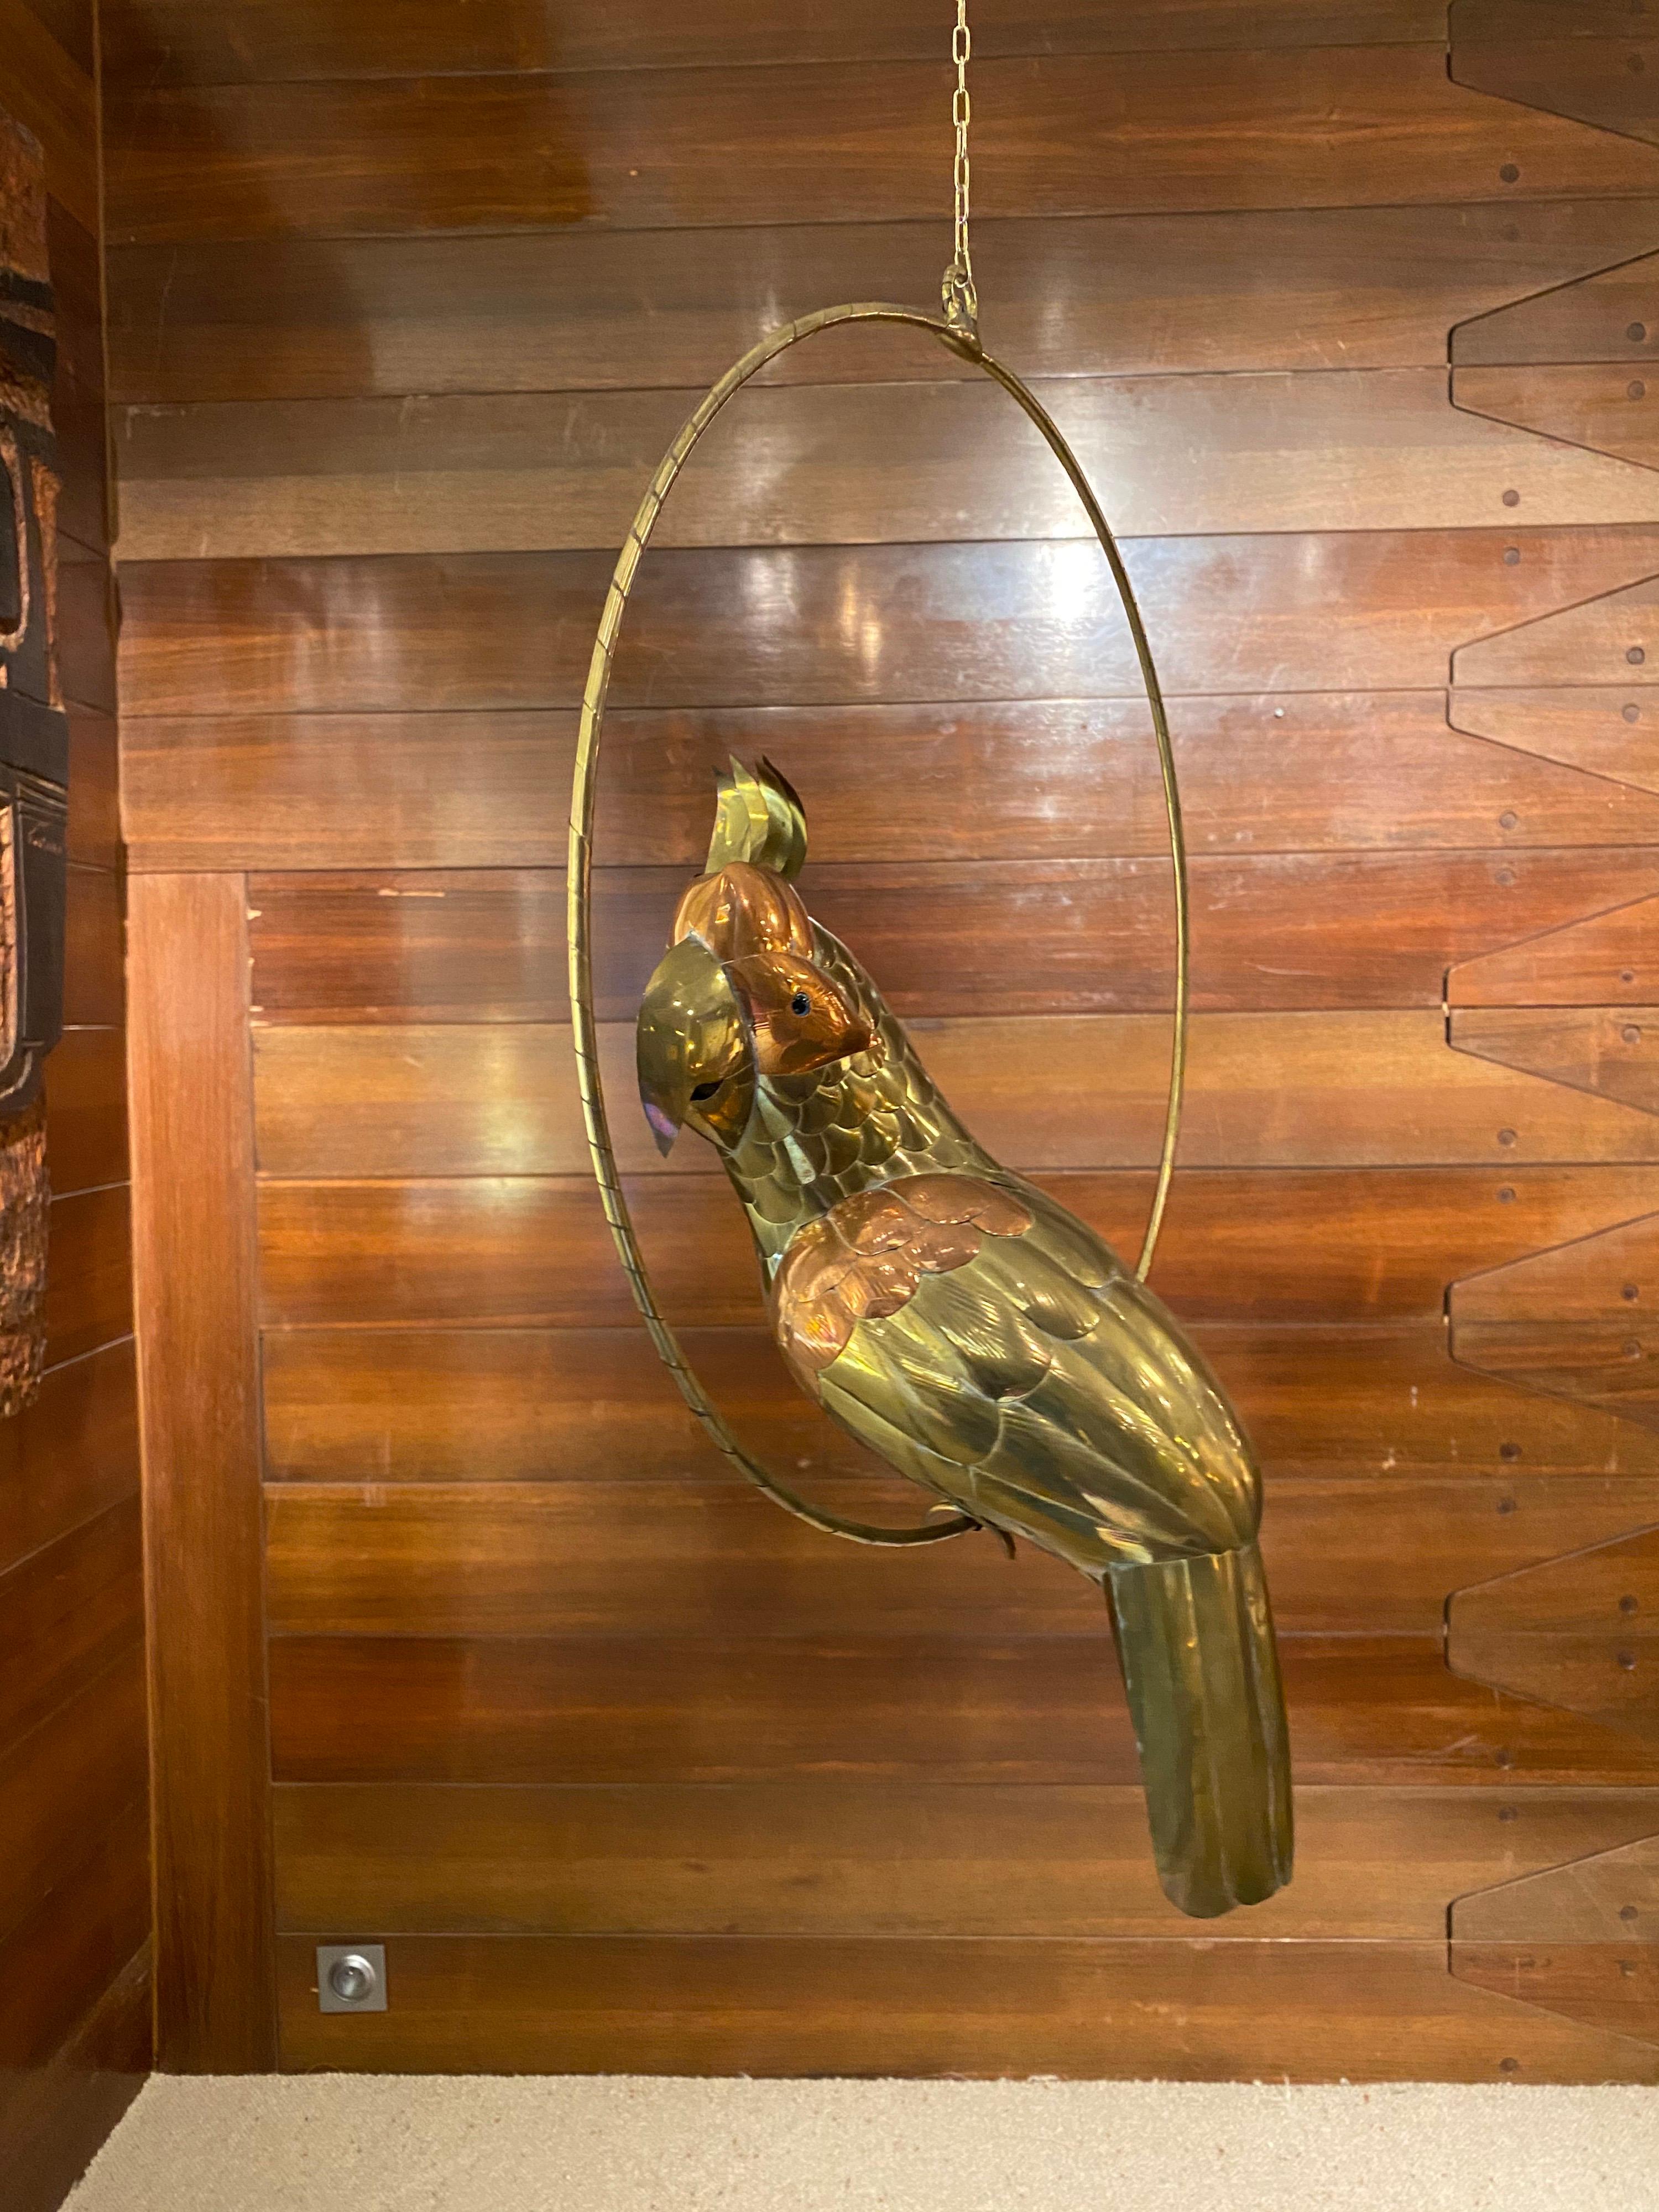 Large parrot on his perch made of copper and brass to give variety of colors and texture to this bird.
Designed by Sergio Bustamante (Mexican designer) who was famous for his depictions of animals.
He still bring imagination and surrealism to his